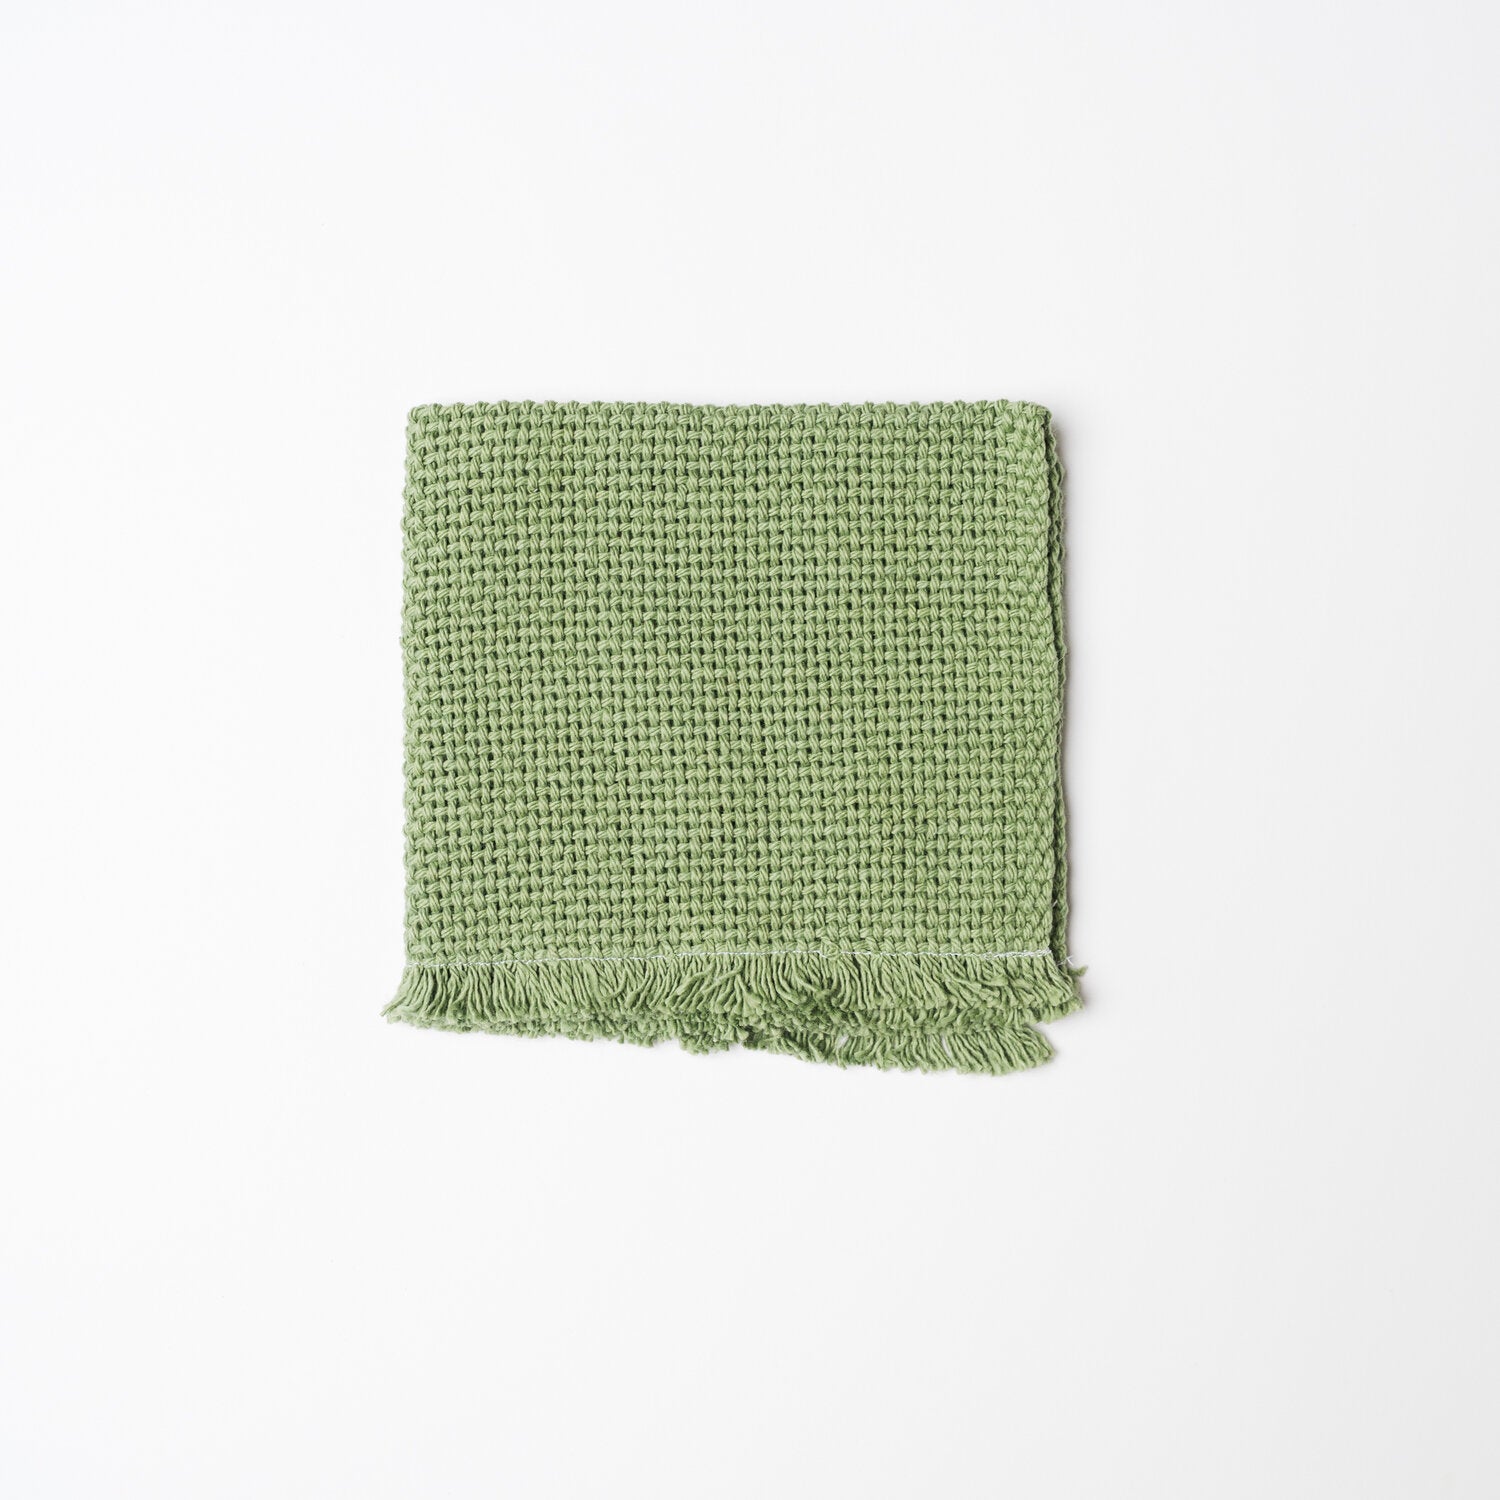 KD Weave Green Wash Cloth, Set of 2